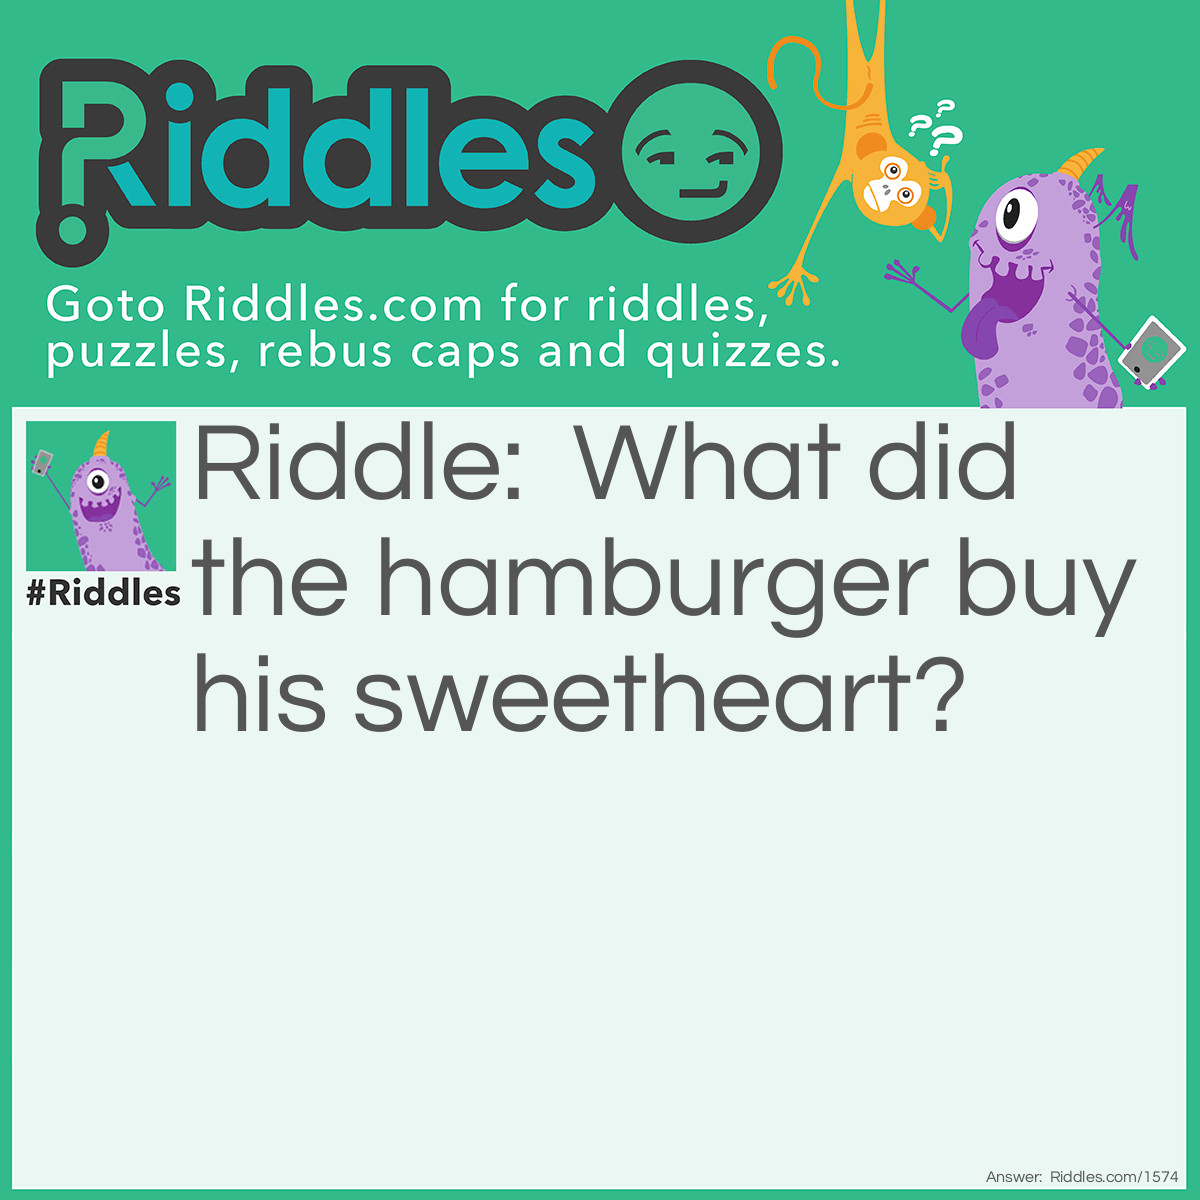 Riddle: What did the hamburger buy his sweetheart? Answer: An onion ring.